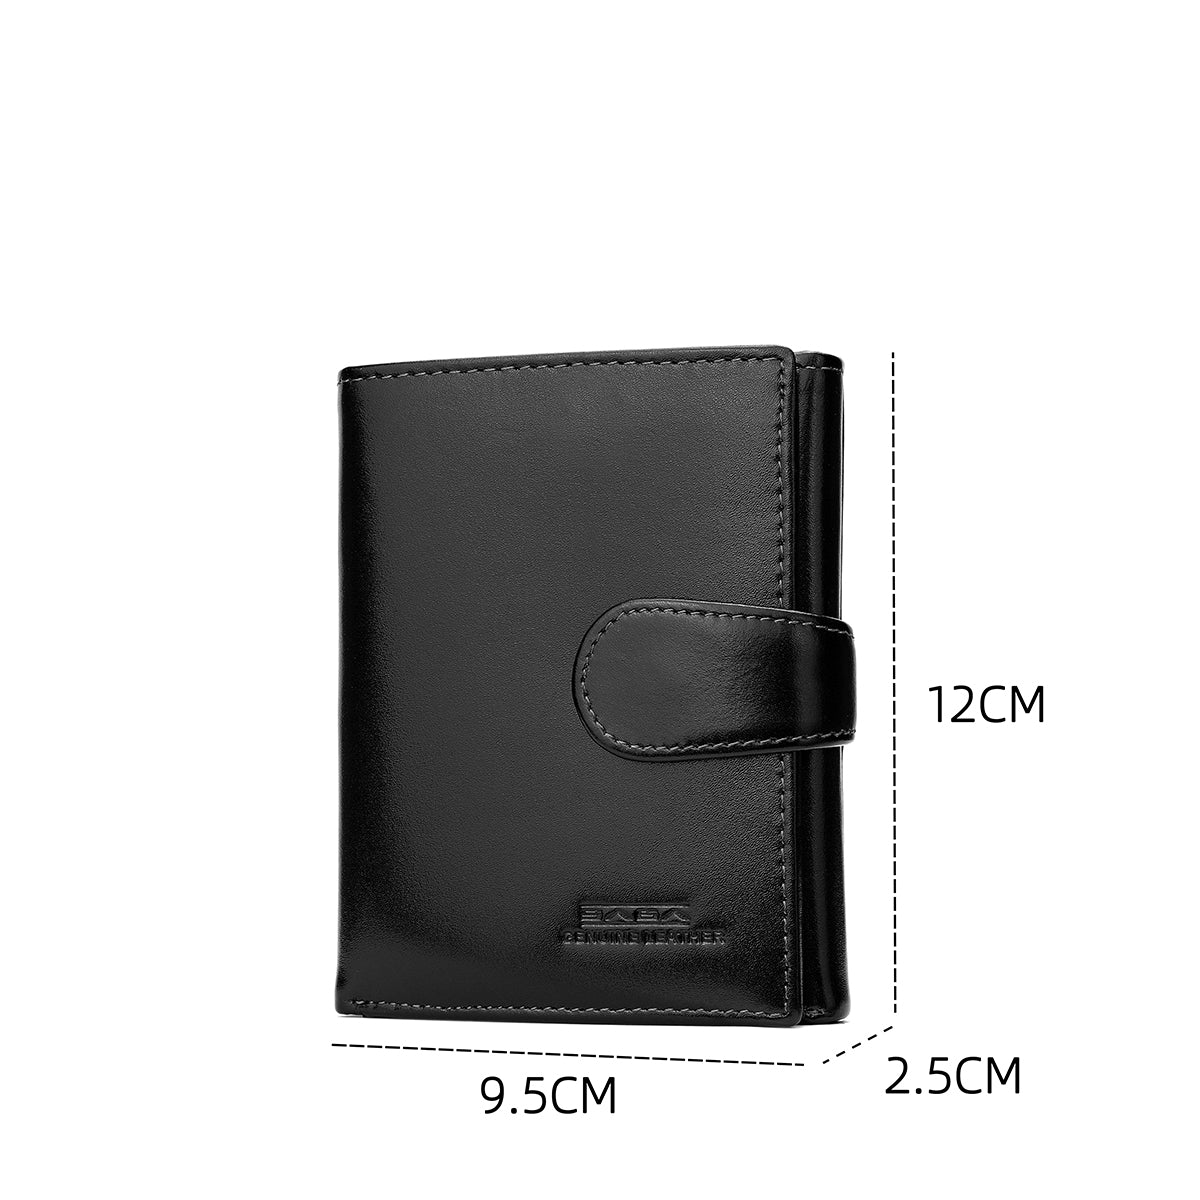 Men's wallet with an elegant interior and exterior design, original natural leather, in black or brown